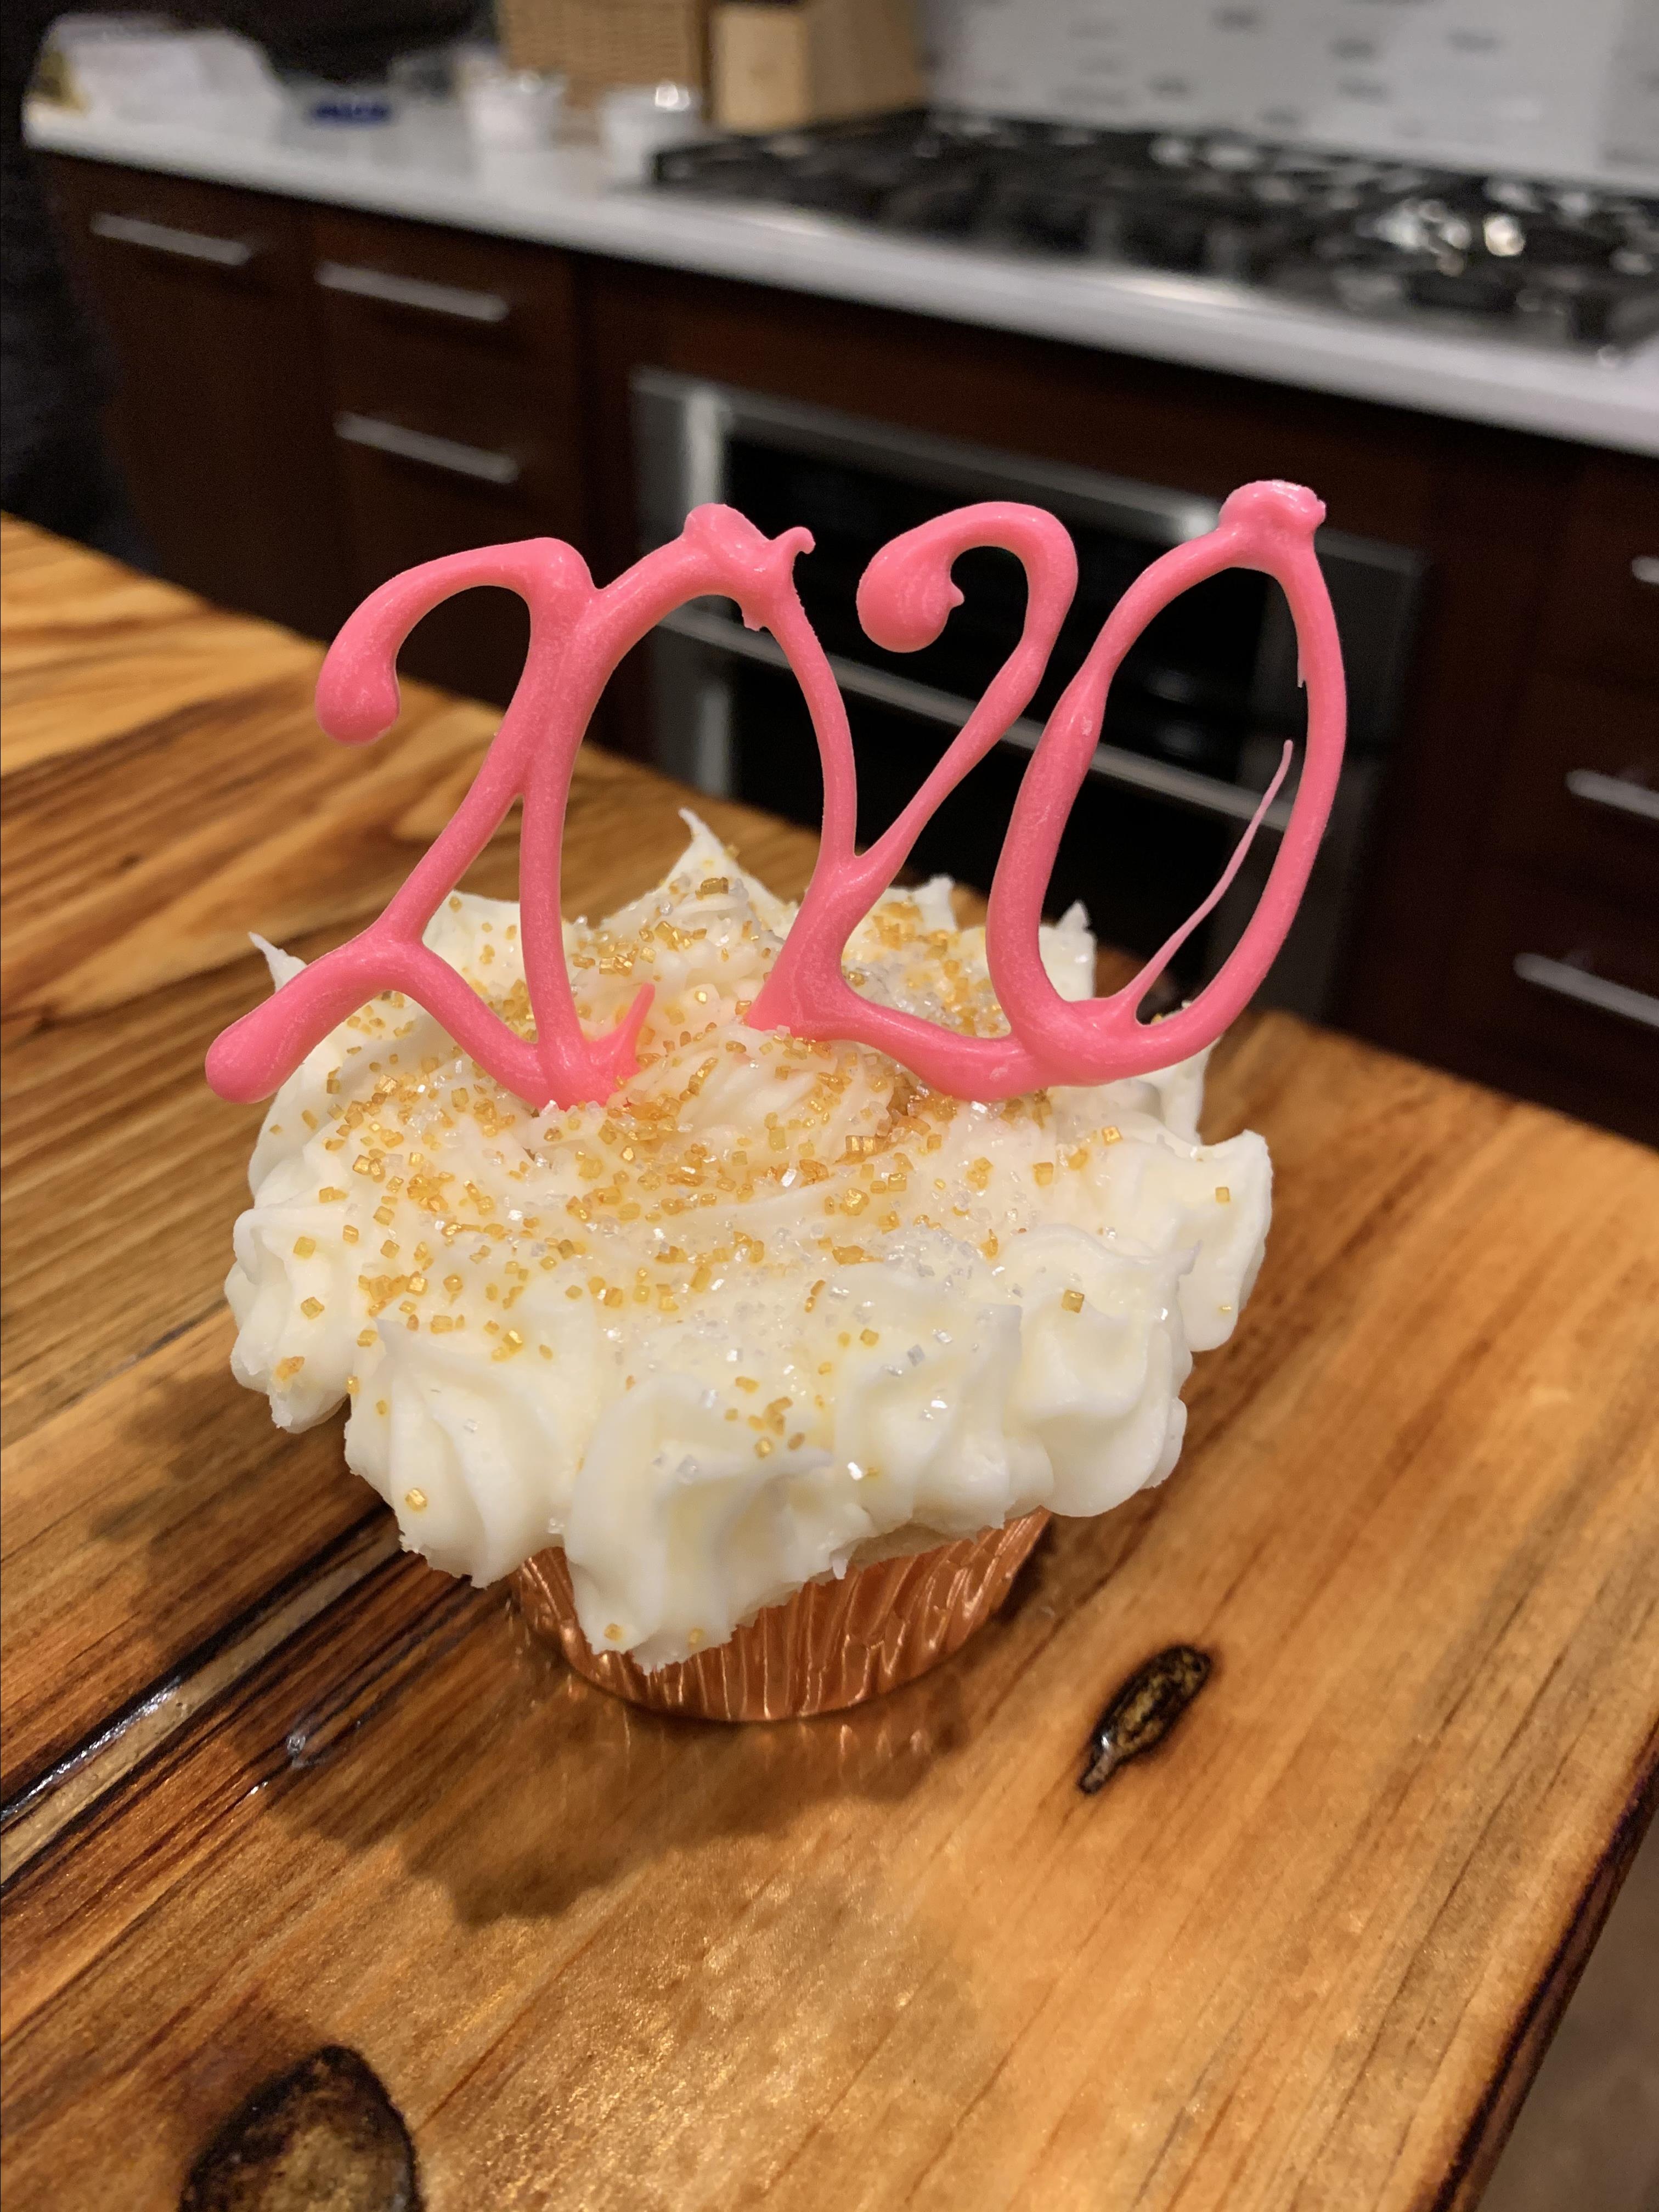 Champagne Cupcakes Amy Diesburg-Stanwood